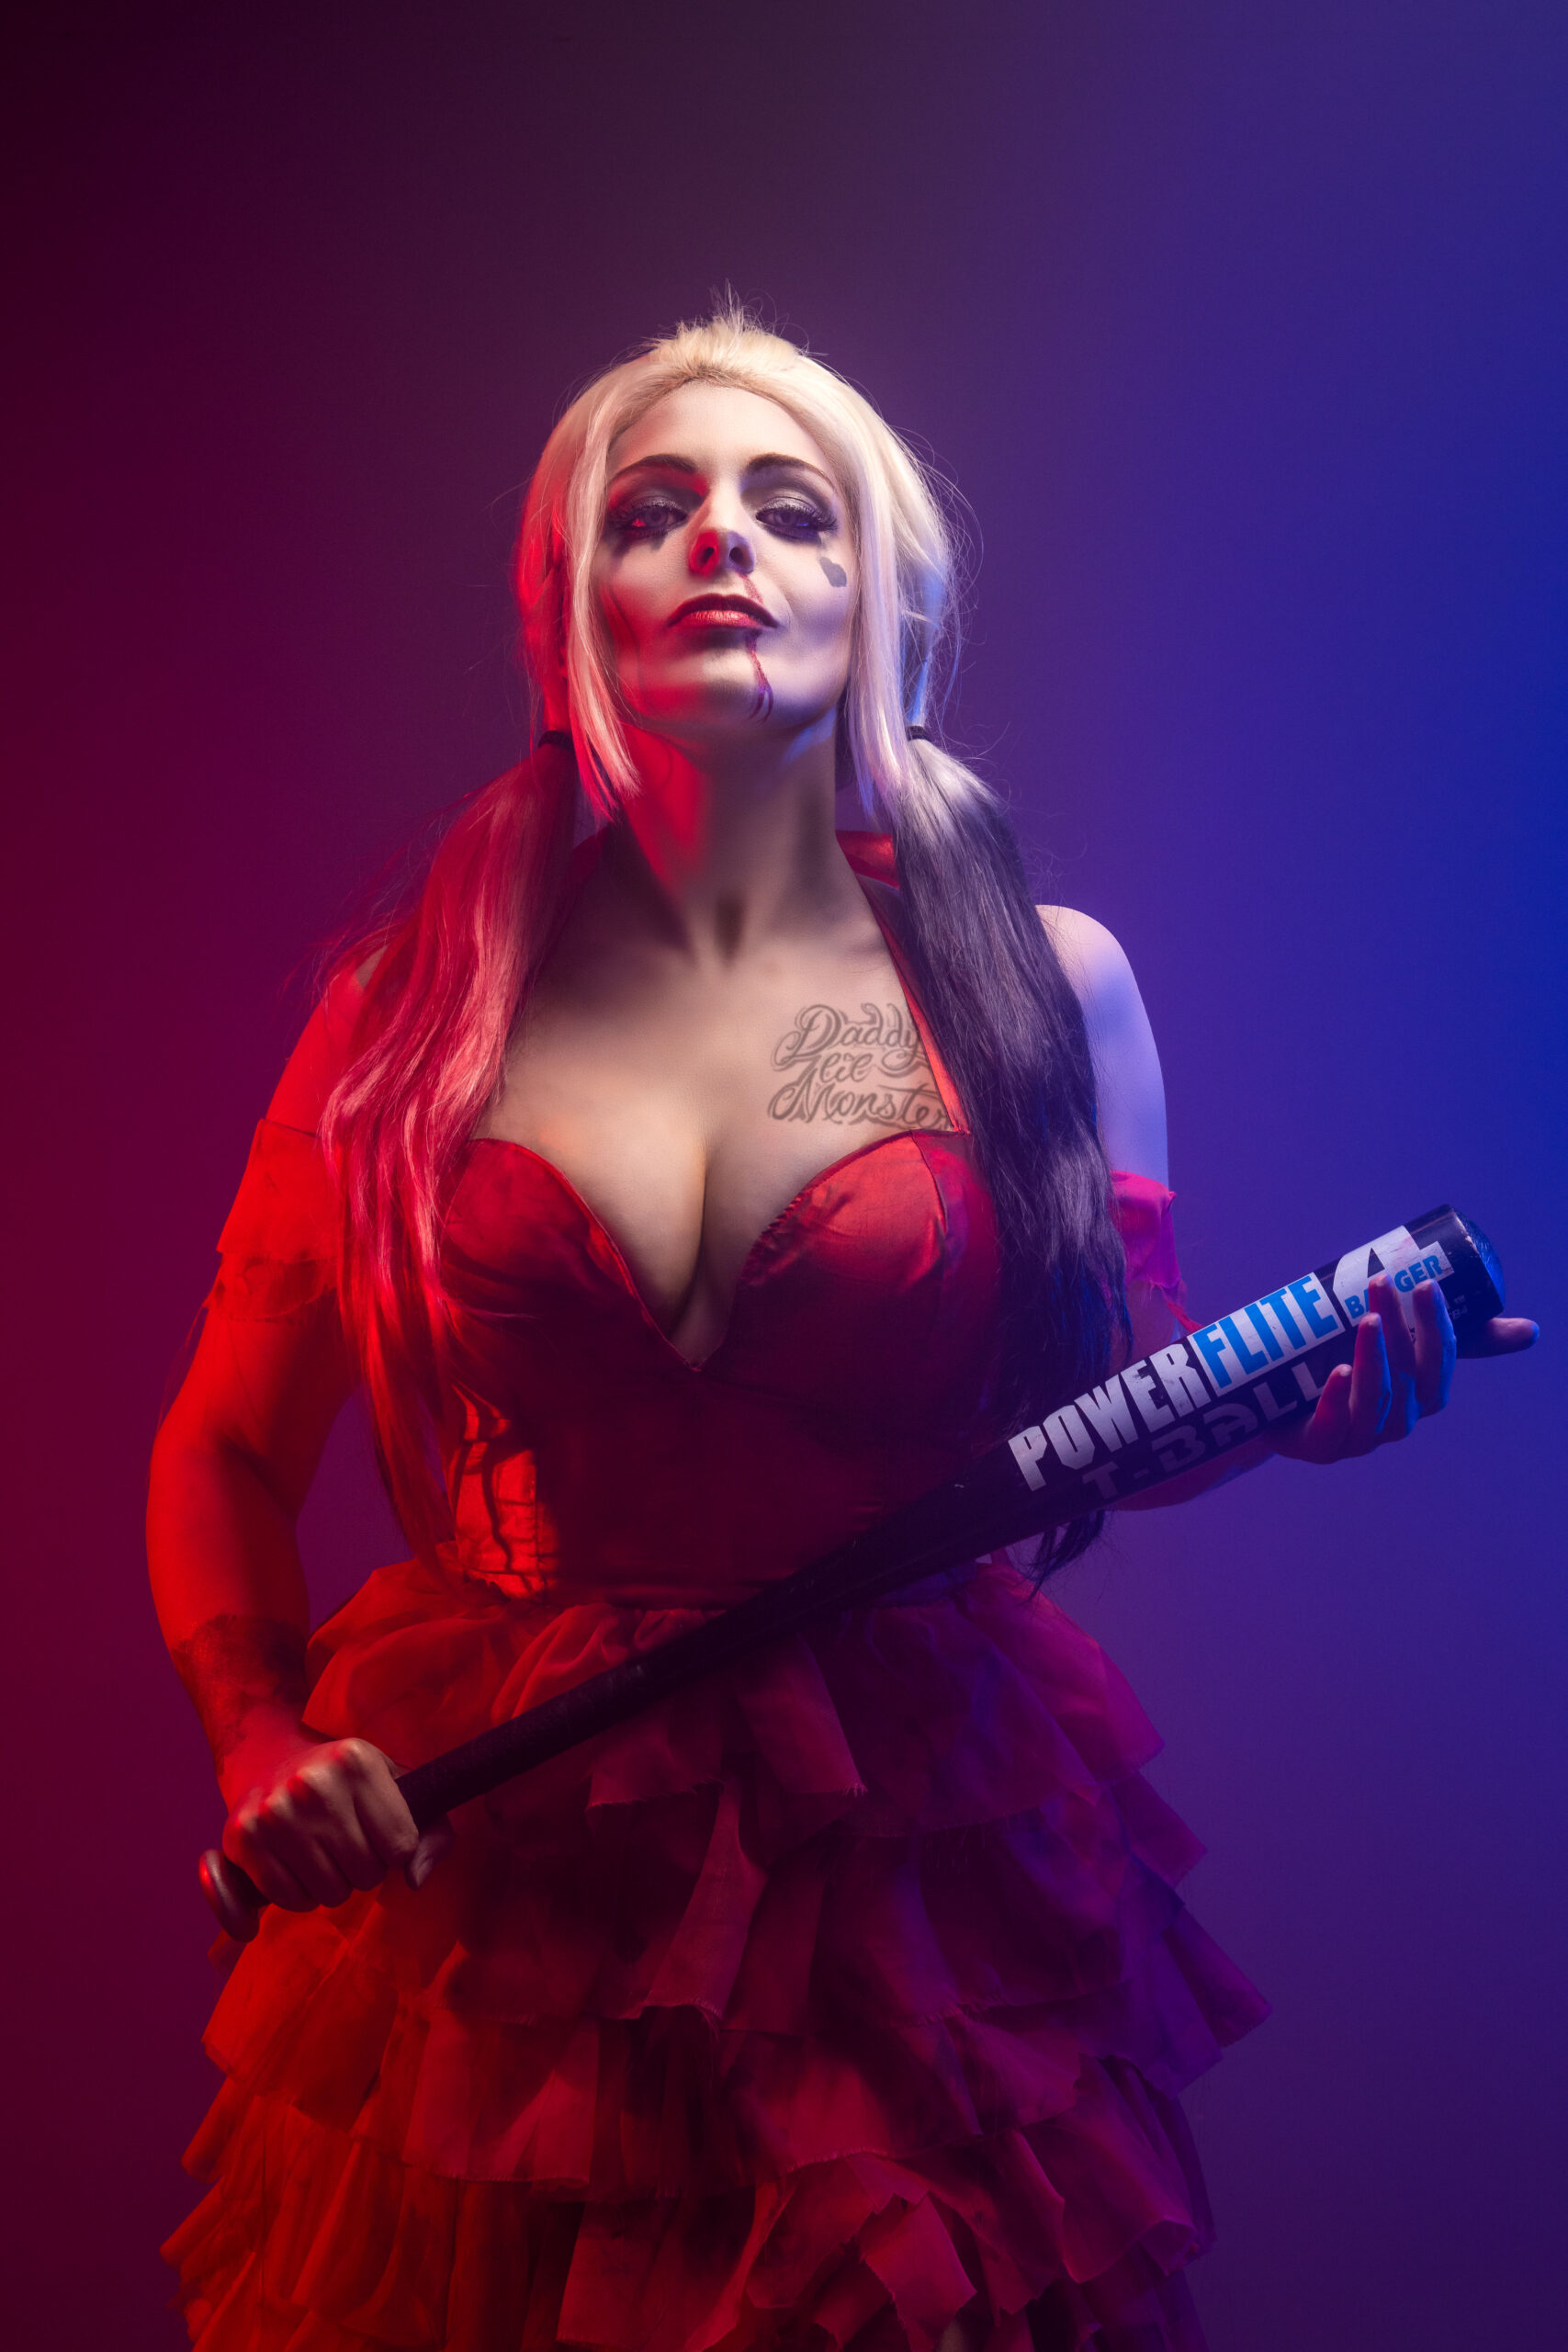 Creepy Princess Cosplay – Harley Quinn – The Suicide Squad